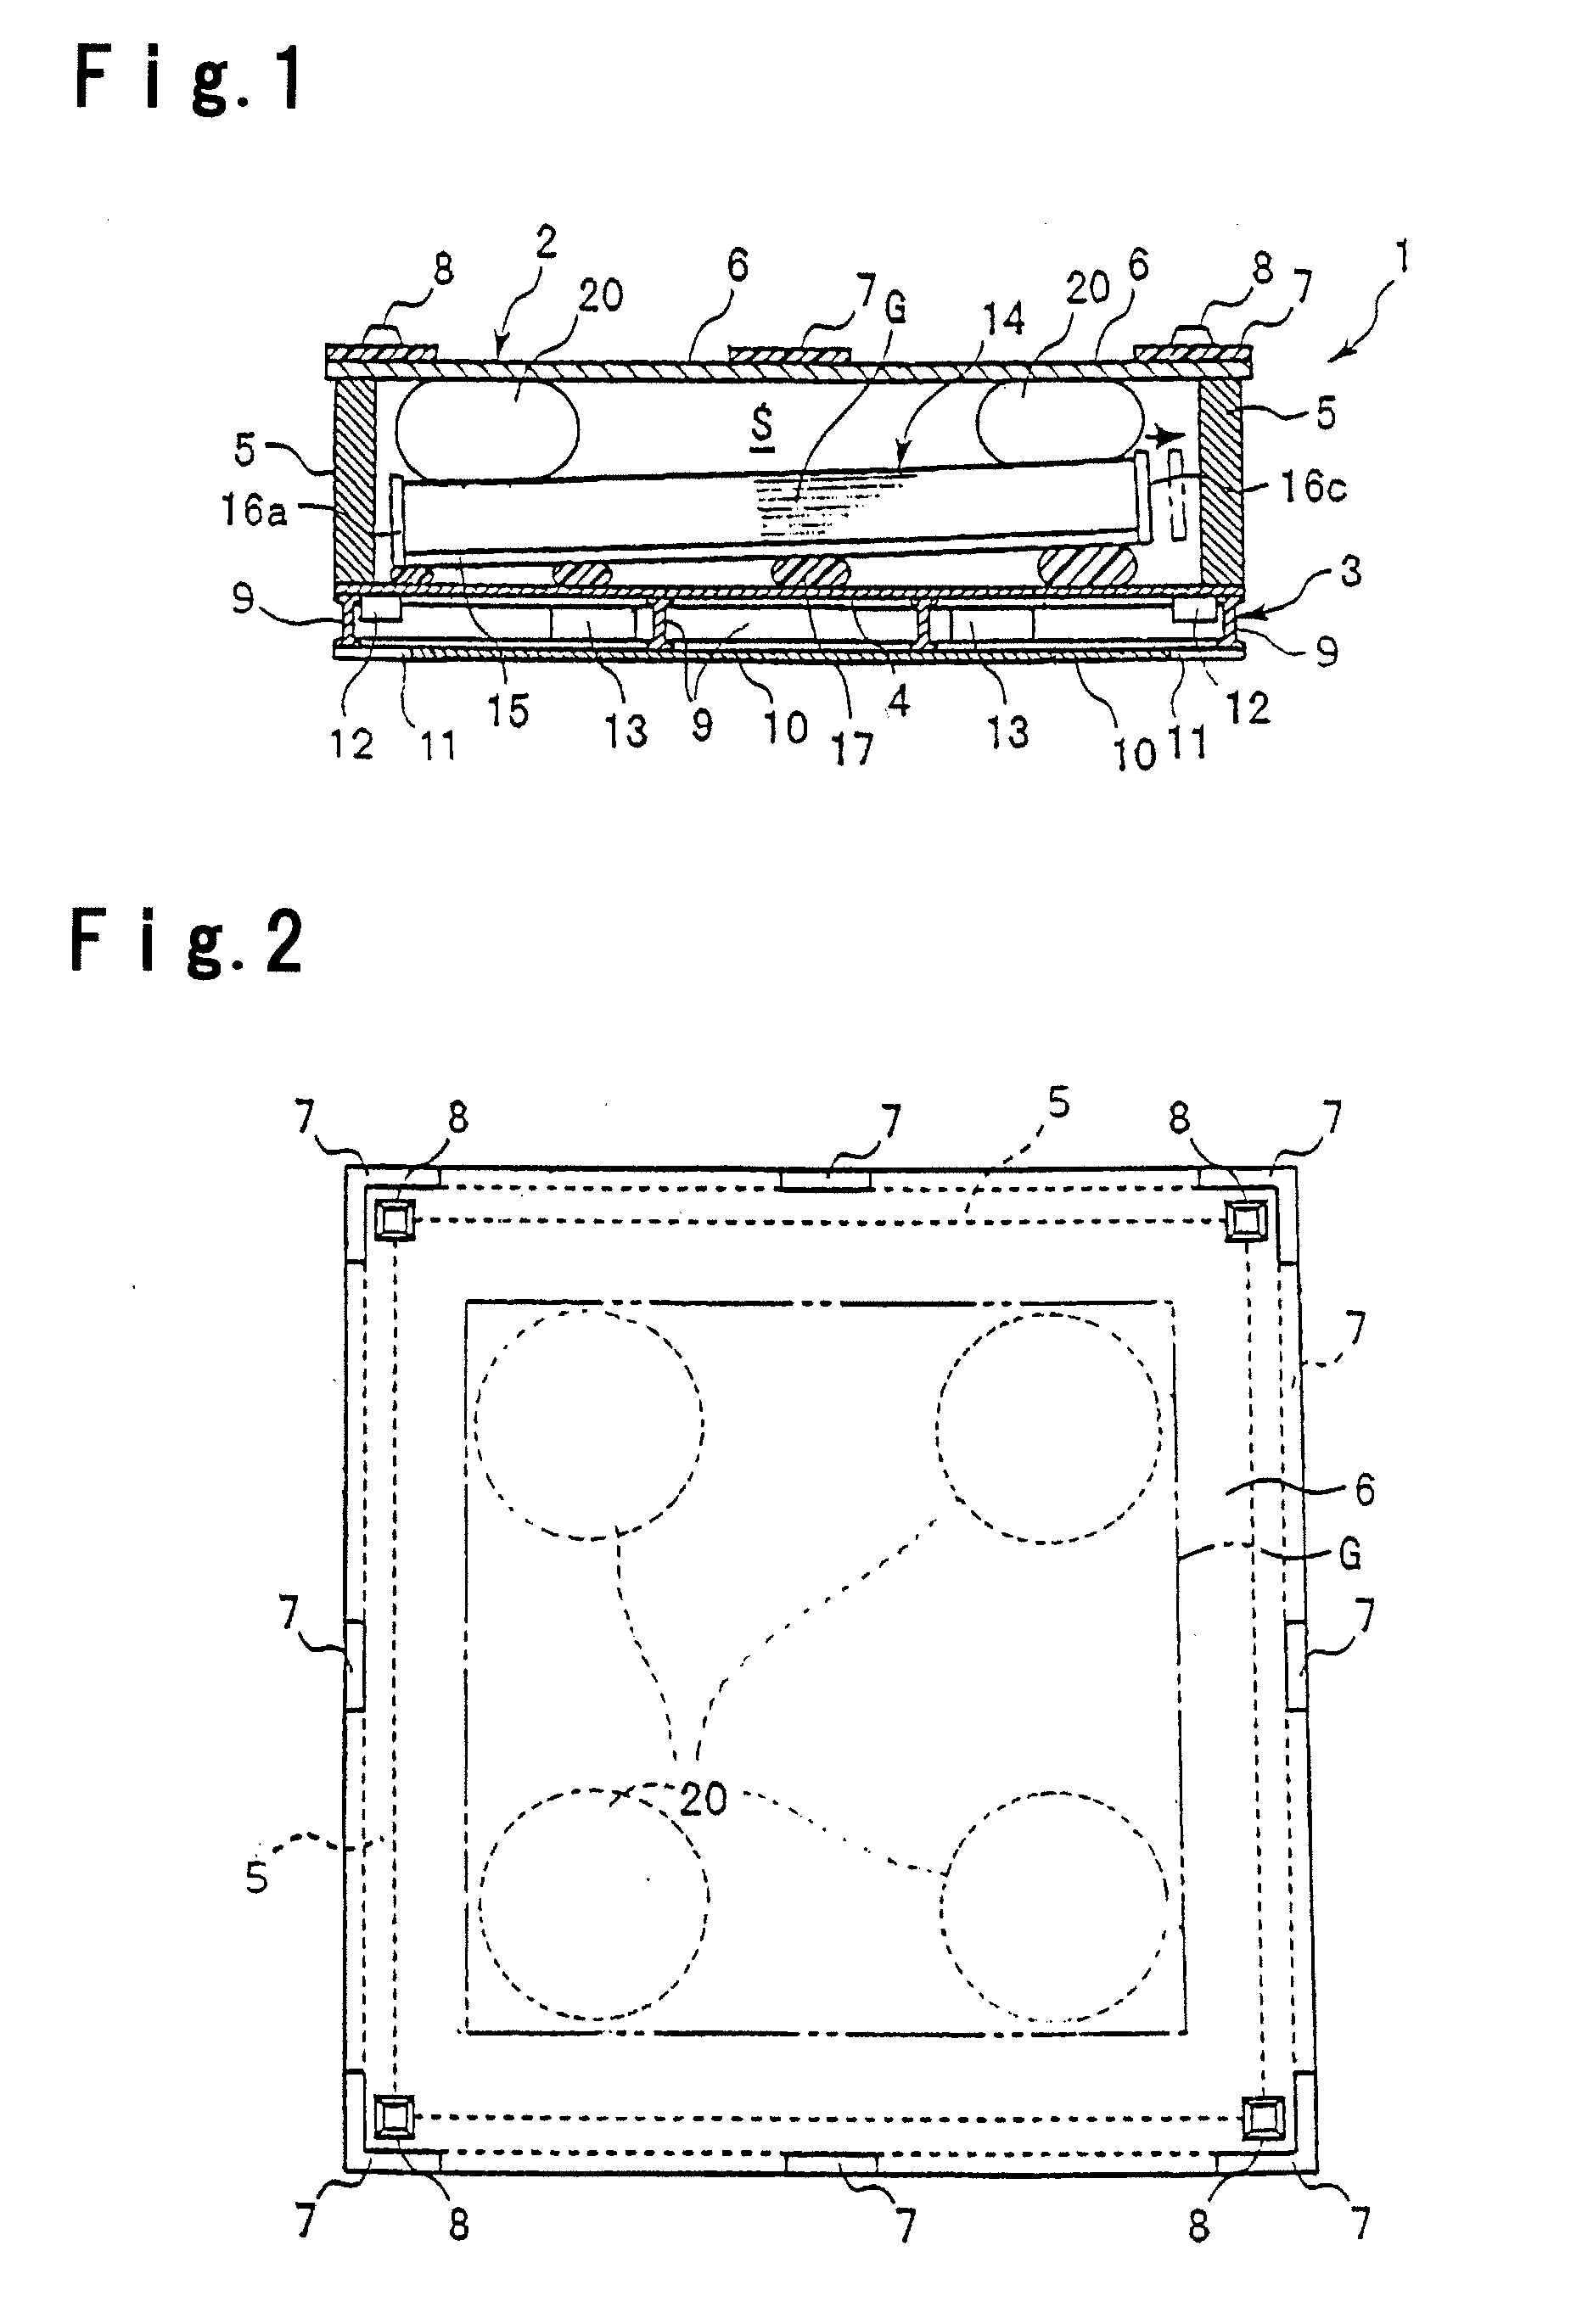 Plate material packing box, plate material transporting method, and plate material loading or unloading method